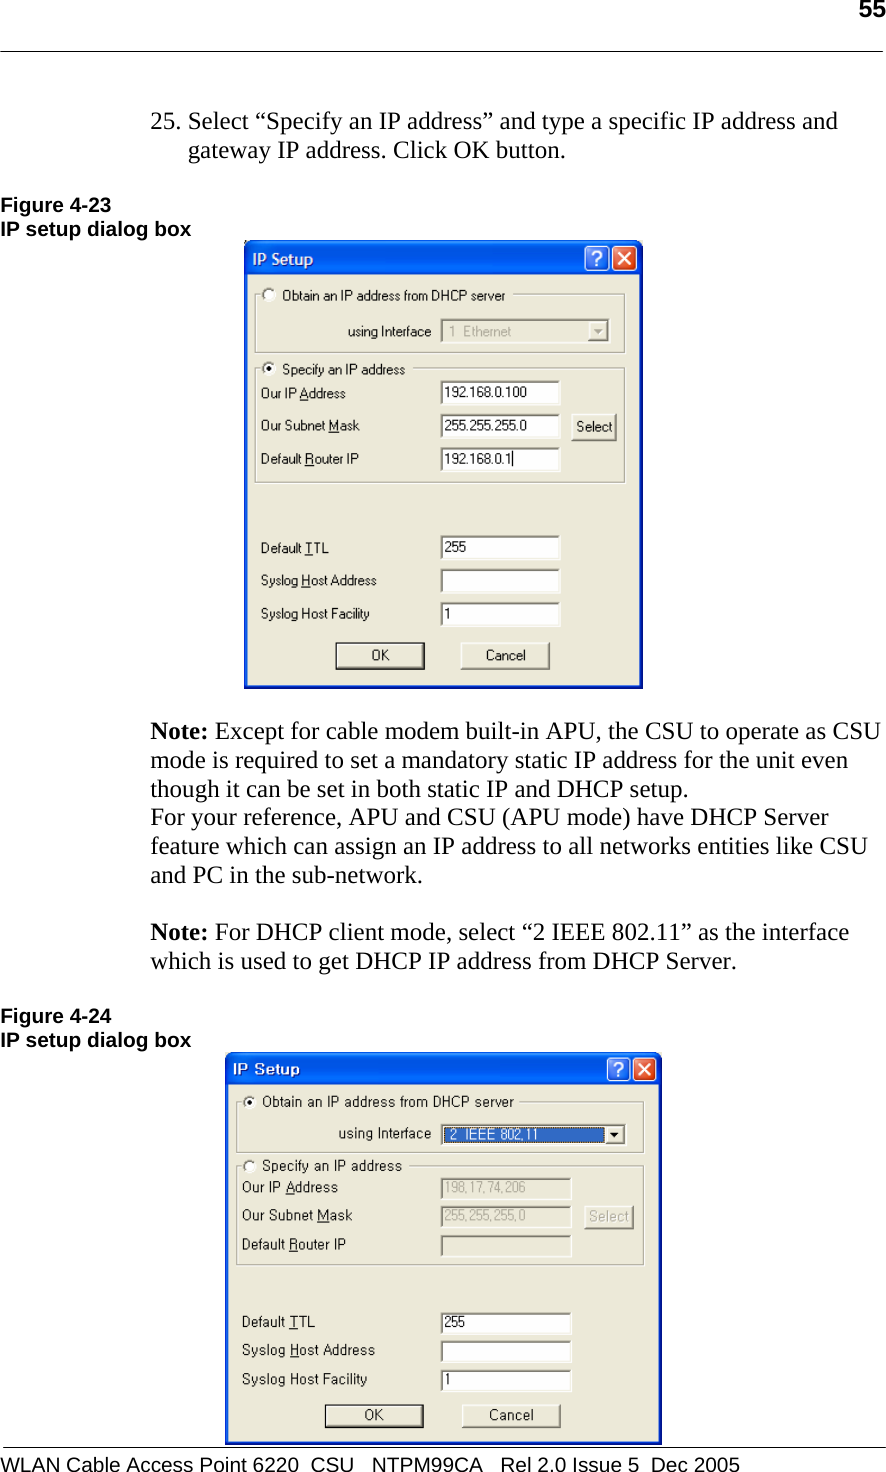   55  WLAN Cable Access Point 6220  CSU   NTPM99CA   Rel 2.0 Issue 5  Dec 2005 25. Select “Specify an IP address” and type a specific IP address and gateway IP address. Click OK button.   Figure 4-23 IP setup dialog box   Note: Except for cable modem built-in APU, the CSU to operate as CSU mode is required to set a mandatory static IP address for the unit even though it can be set in both static IP and DHCP setup.  For your reference, APU and CSU (APU mode) have DHCP Server feature which can assign an IP address to all networks entities like CSU and PC in the sub-network.   Note: For DHCP client mode, select “2 IEEE 802.11” as the interface which is used to get DHCP IP address from DHCP Server.   Figure 4-24 IP setup dialog box  